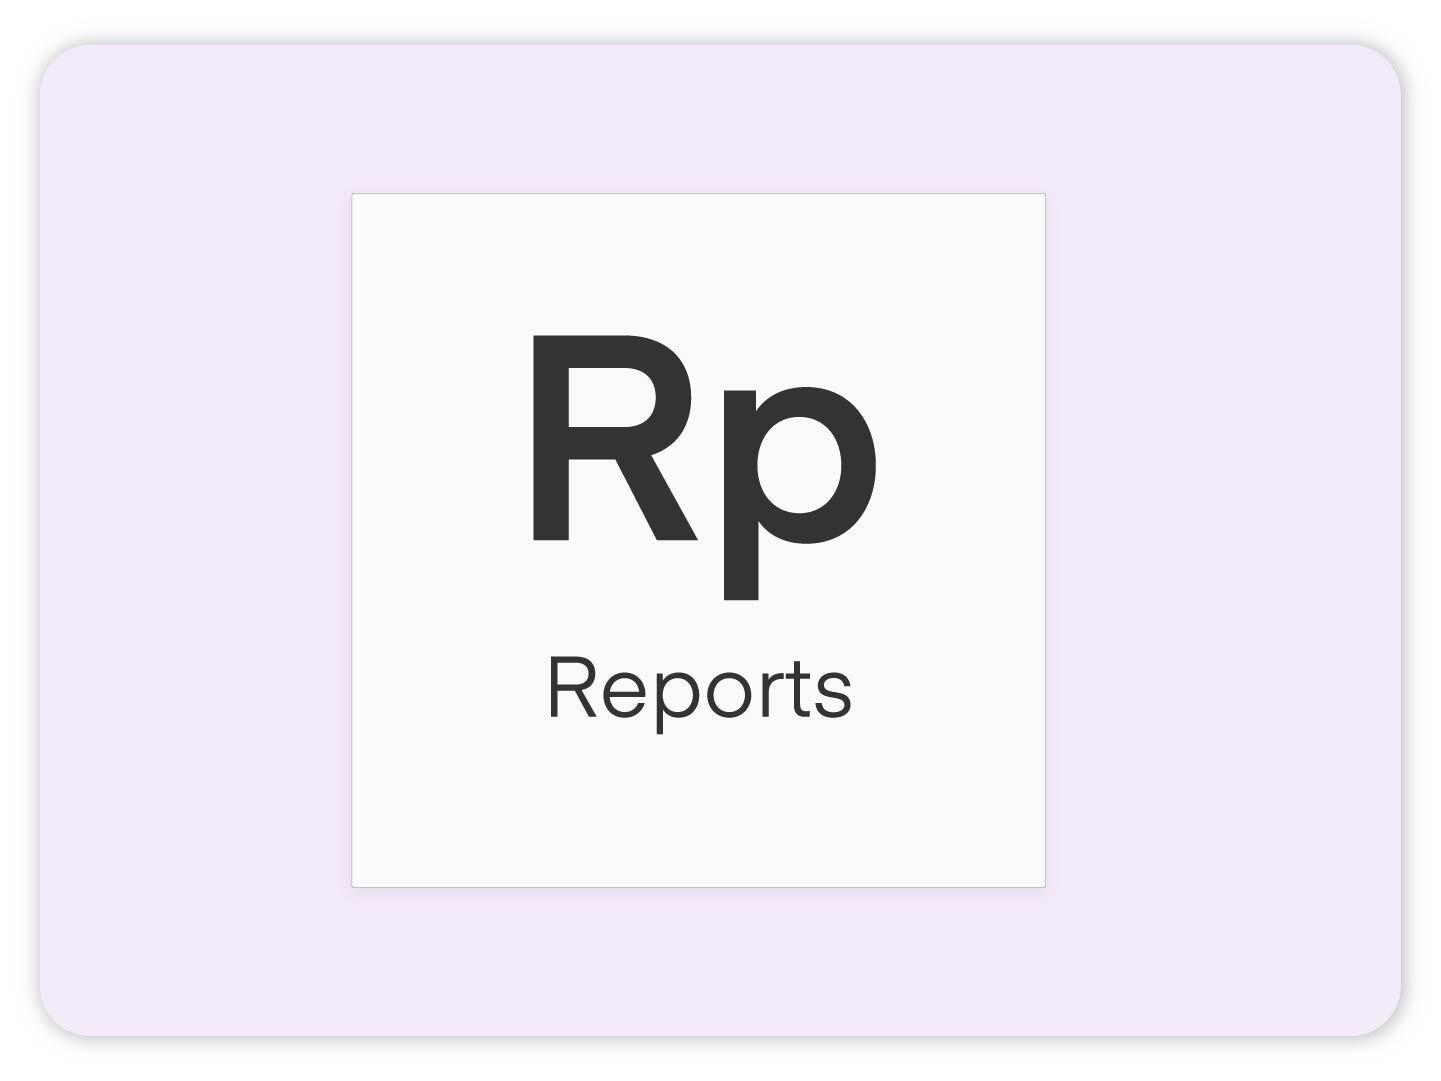 Rp - Reports